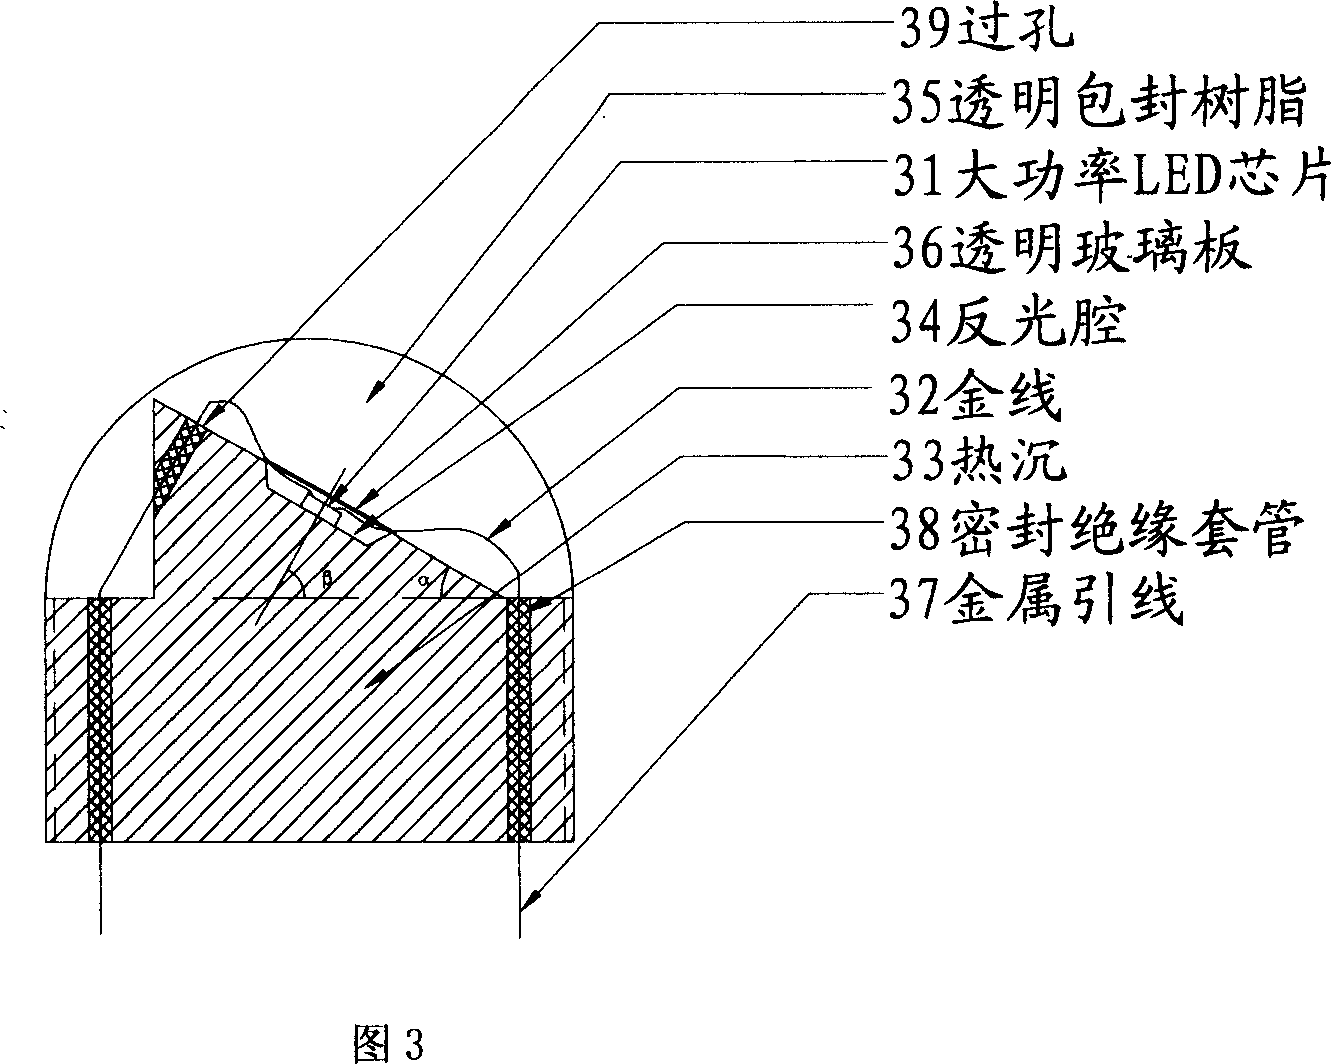 Special power light-emitting diode for road lamp